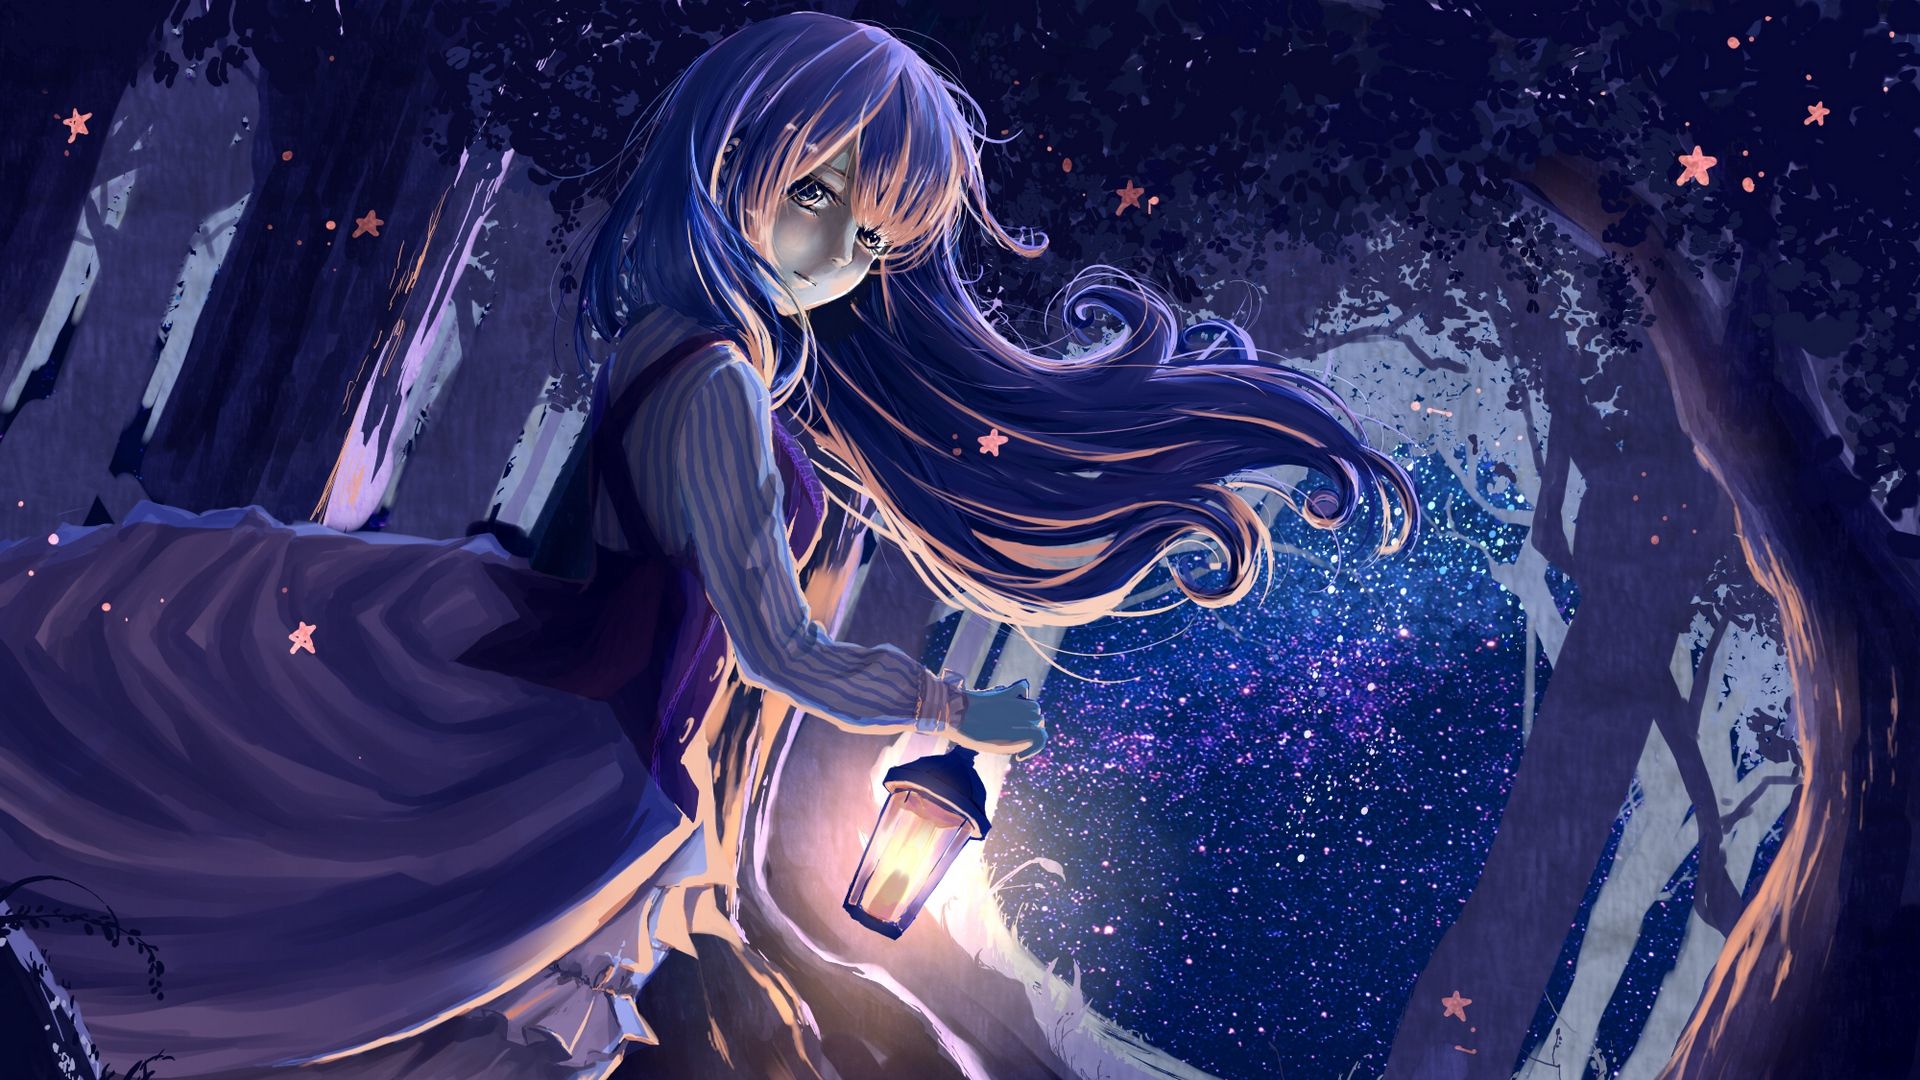 Hd Anime Nightcore Wallpapers Wallpaper Cave